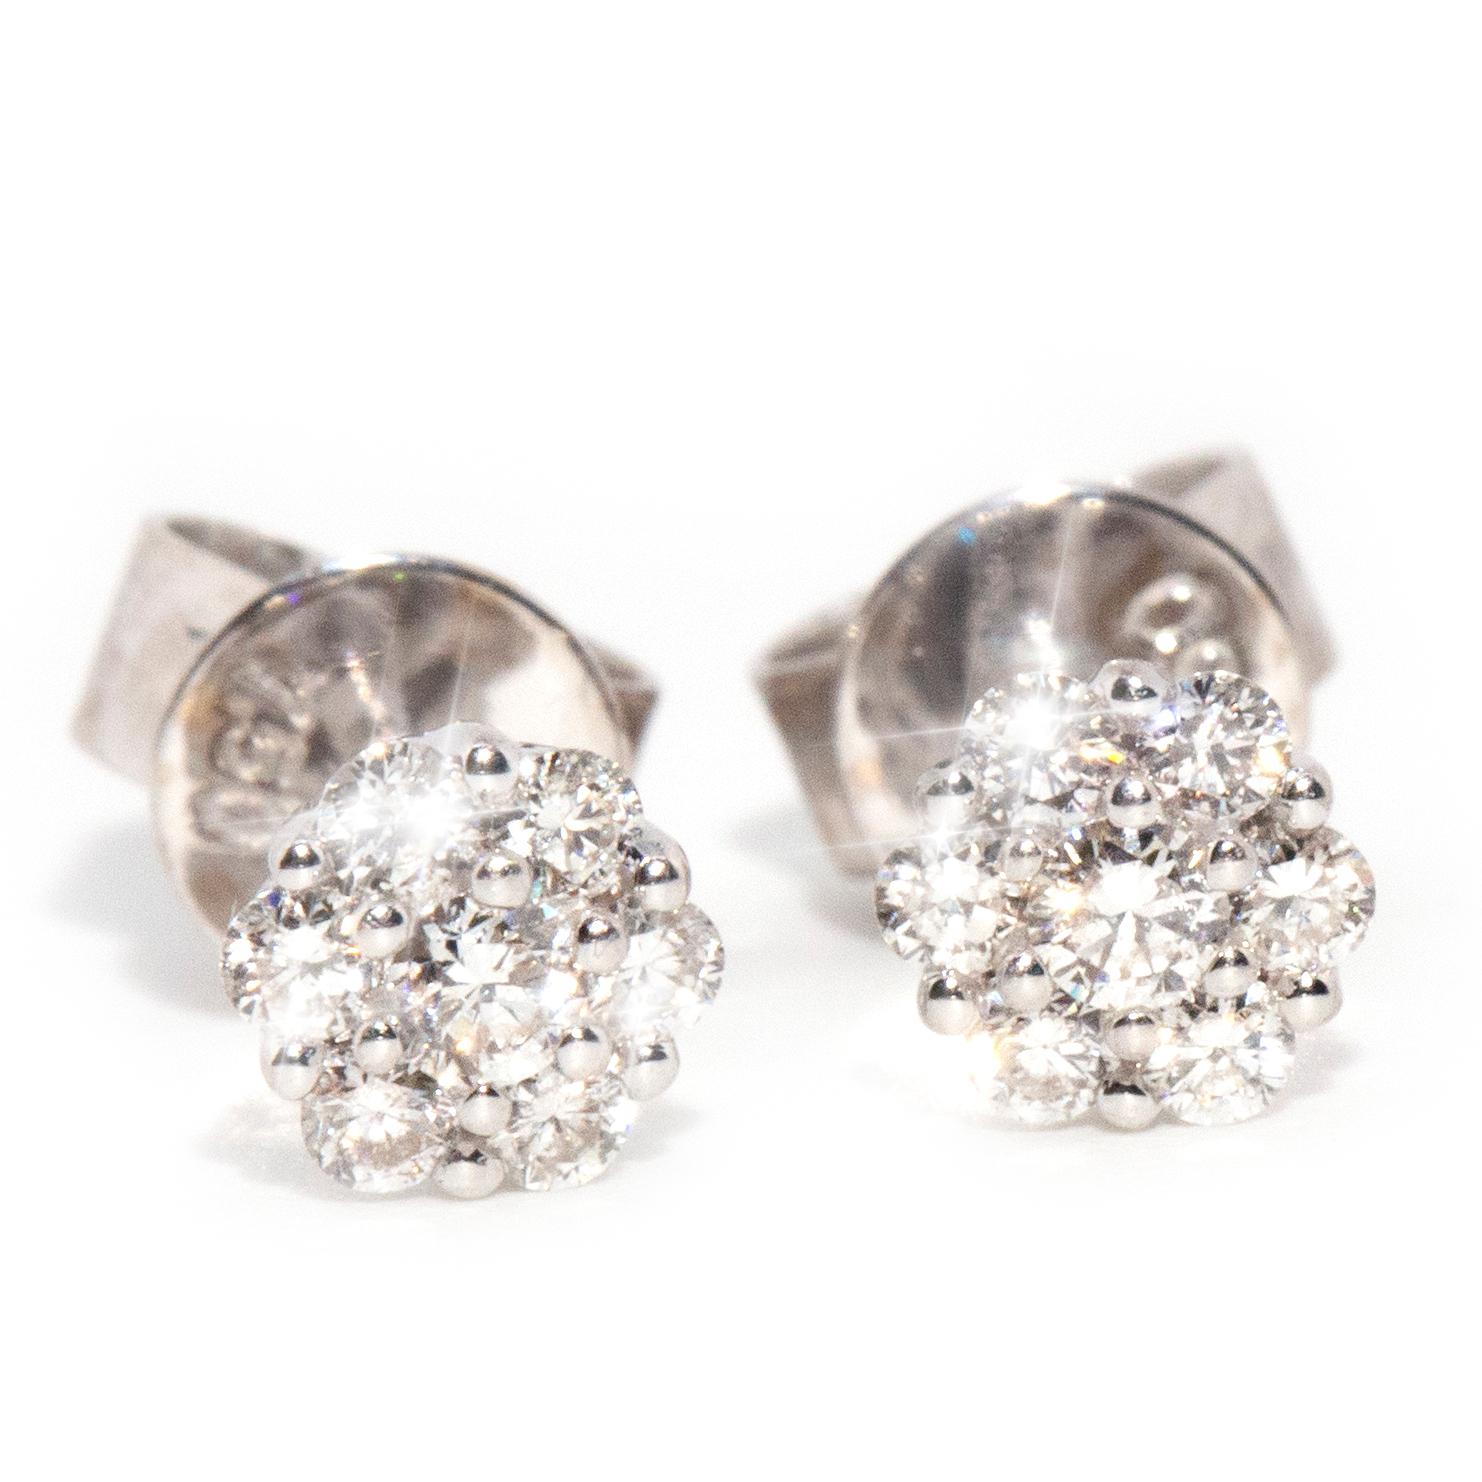 Women's Contemporary 18 Carat White Gold Brilliant Diamond Cluster Studs Style Earrings